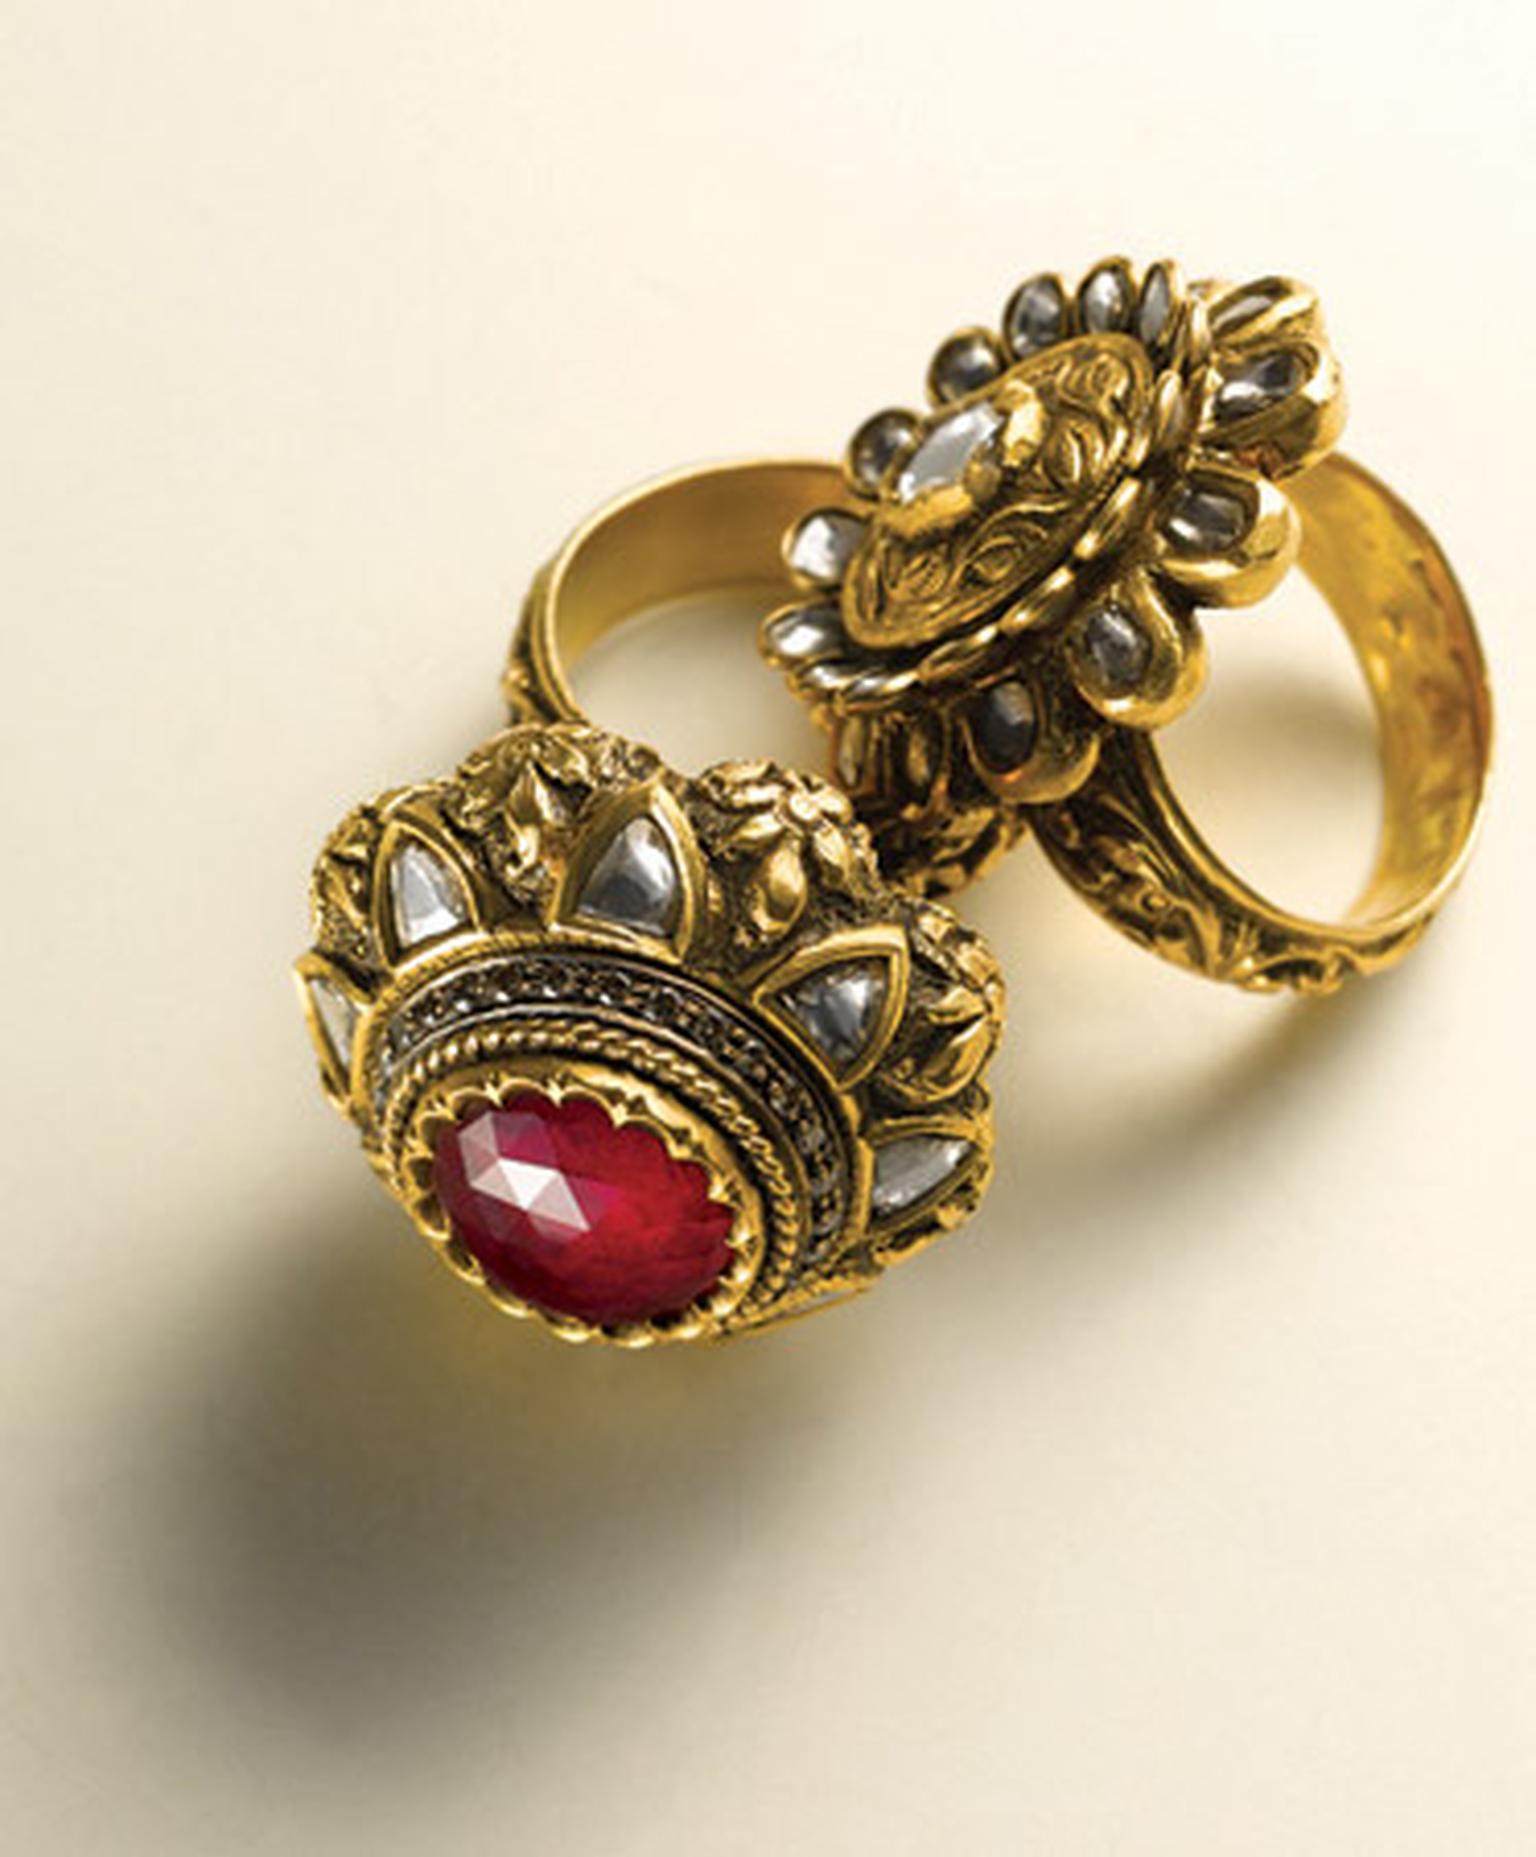 Zoya-13--Rings-from-Rajasthan-collection.jpg